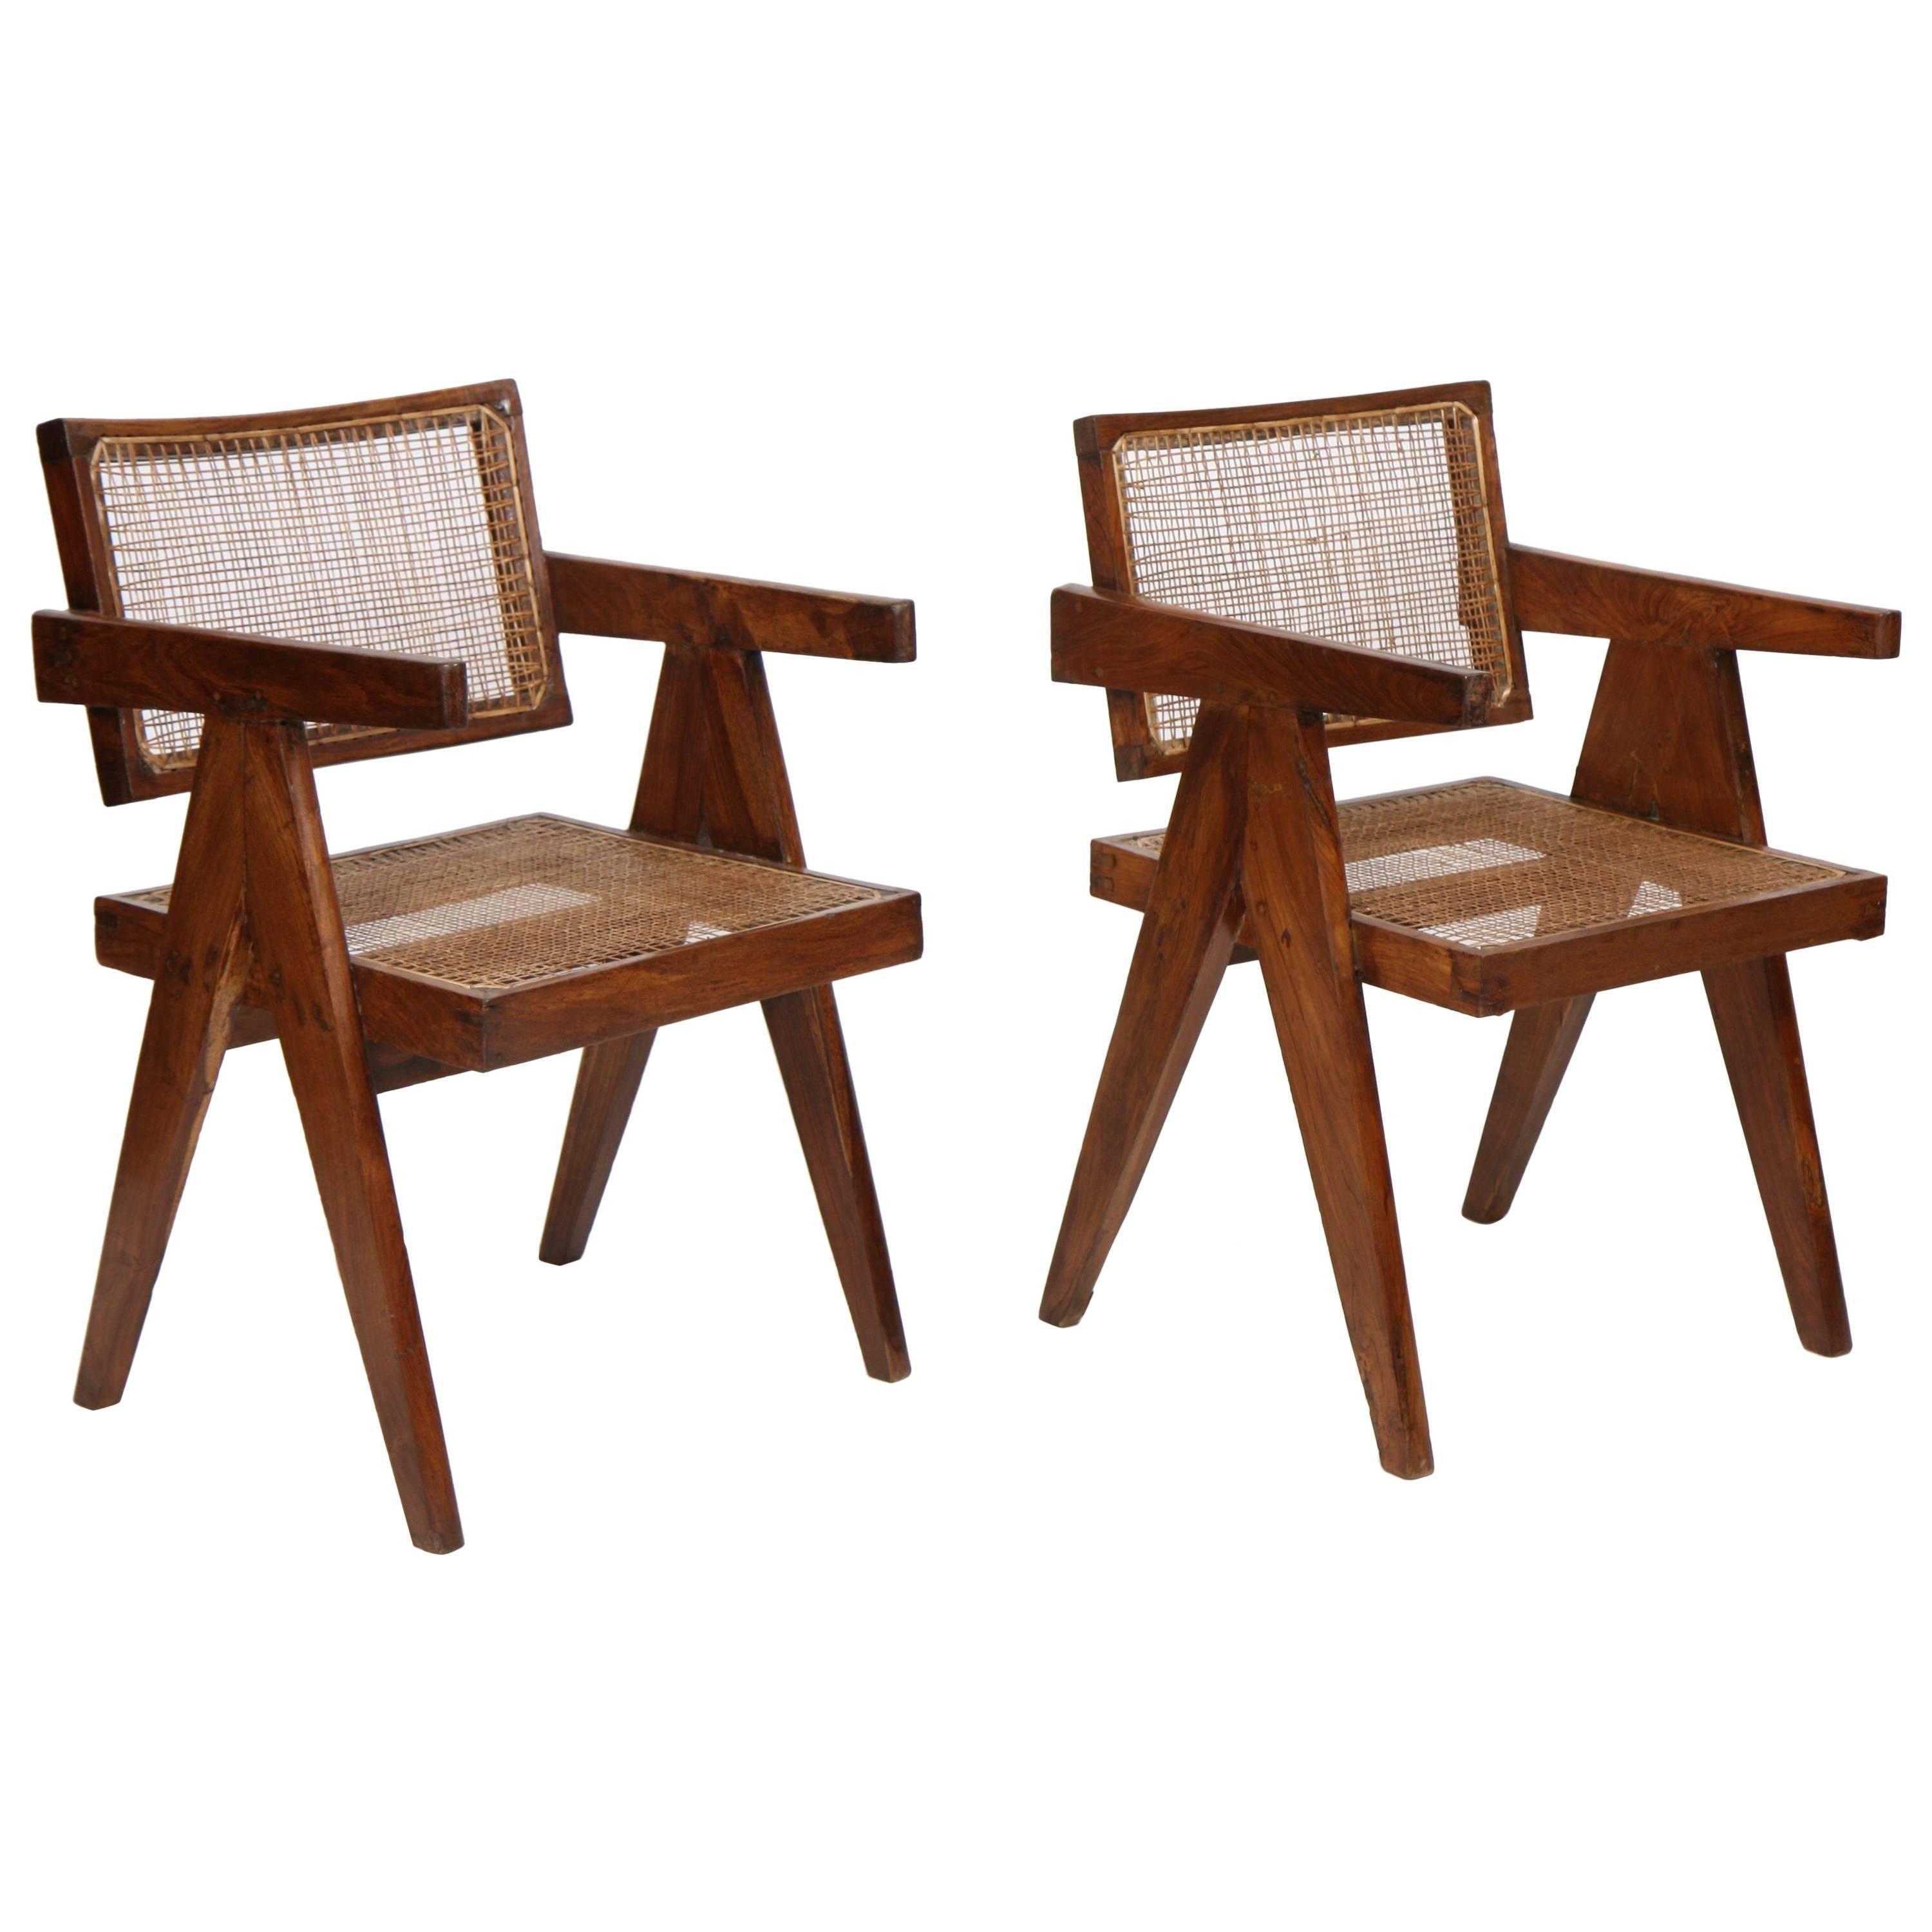 Pair of "Elegant Office Cane Chairs" by Pierre Jeanneret